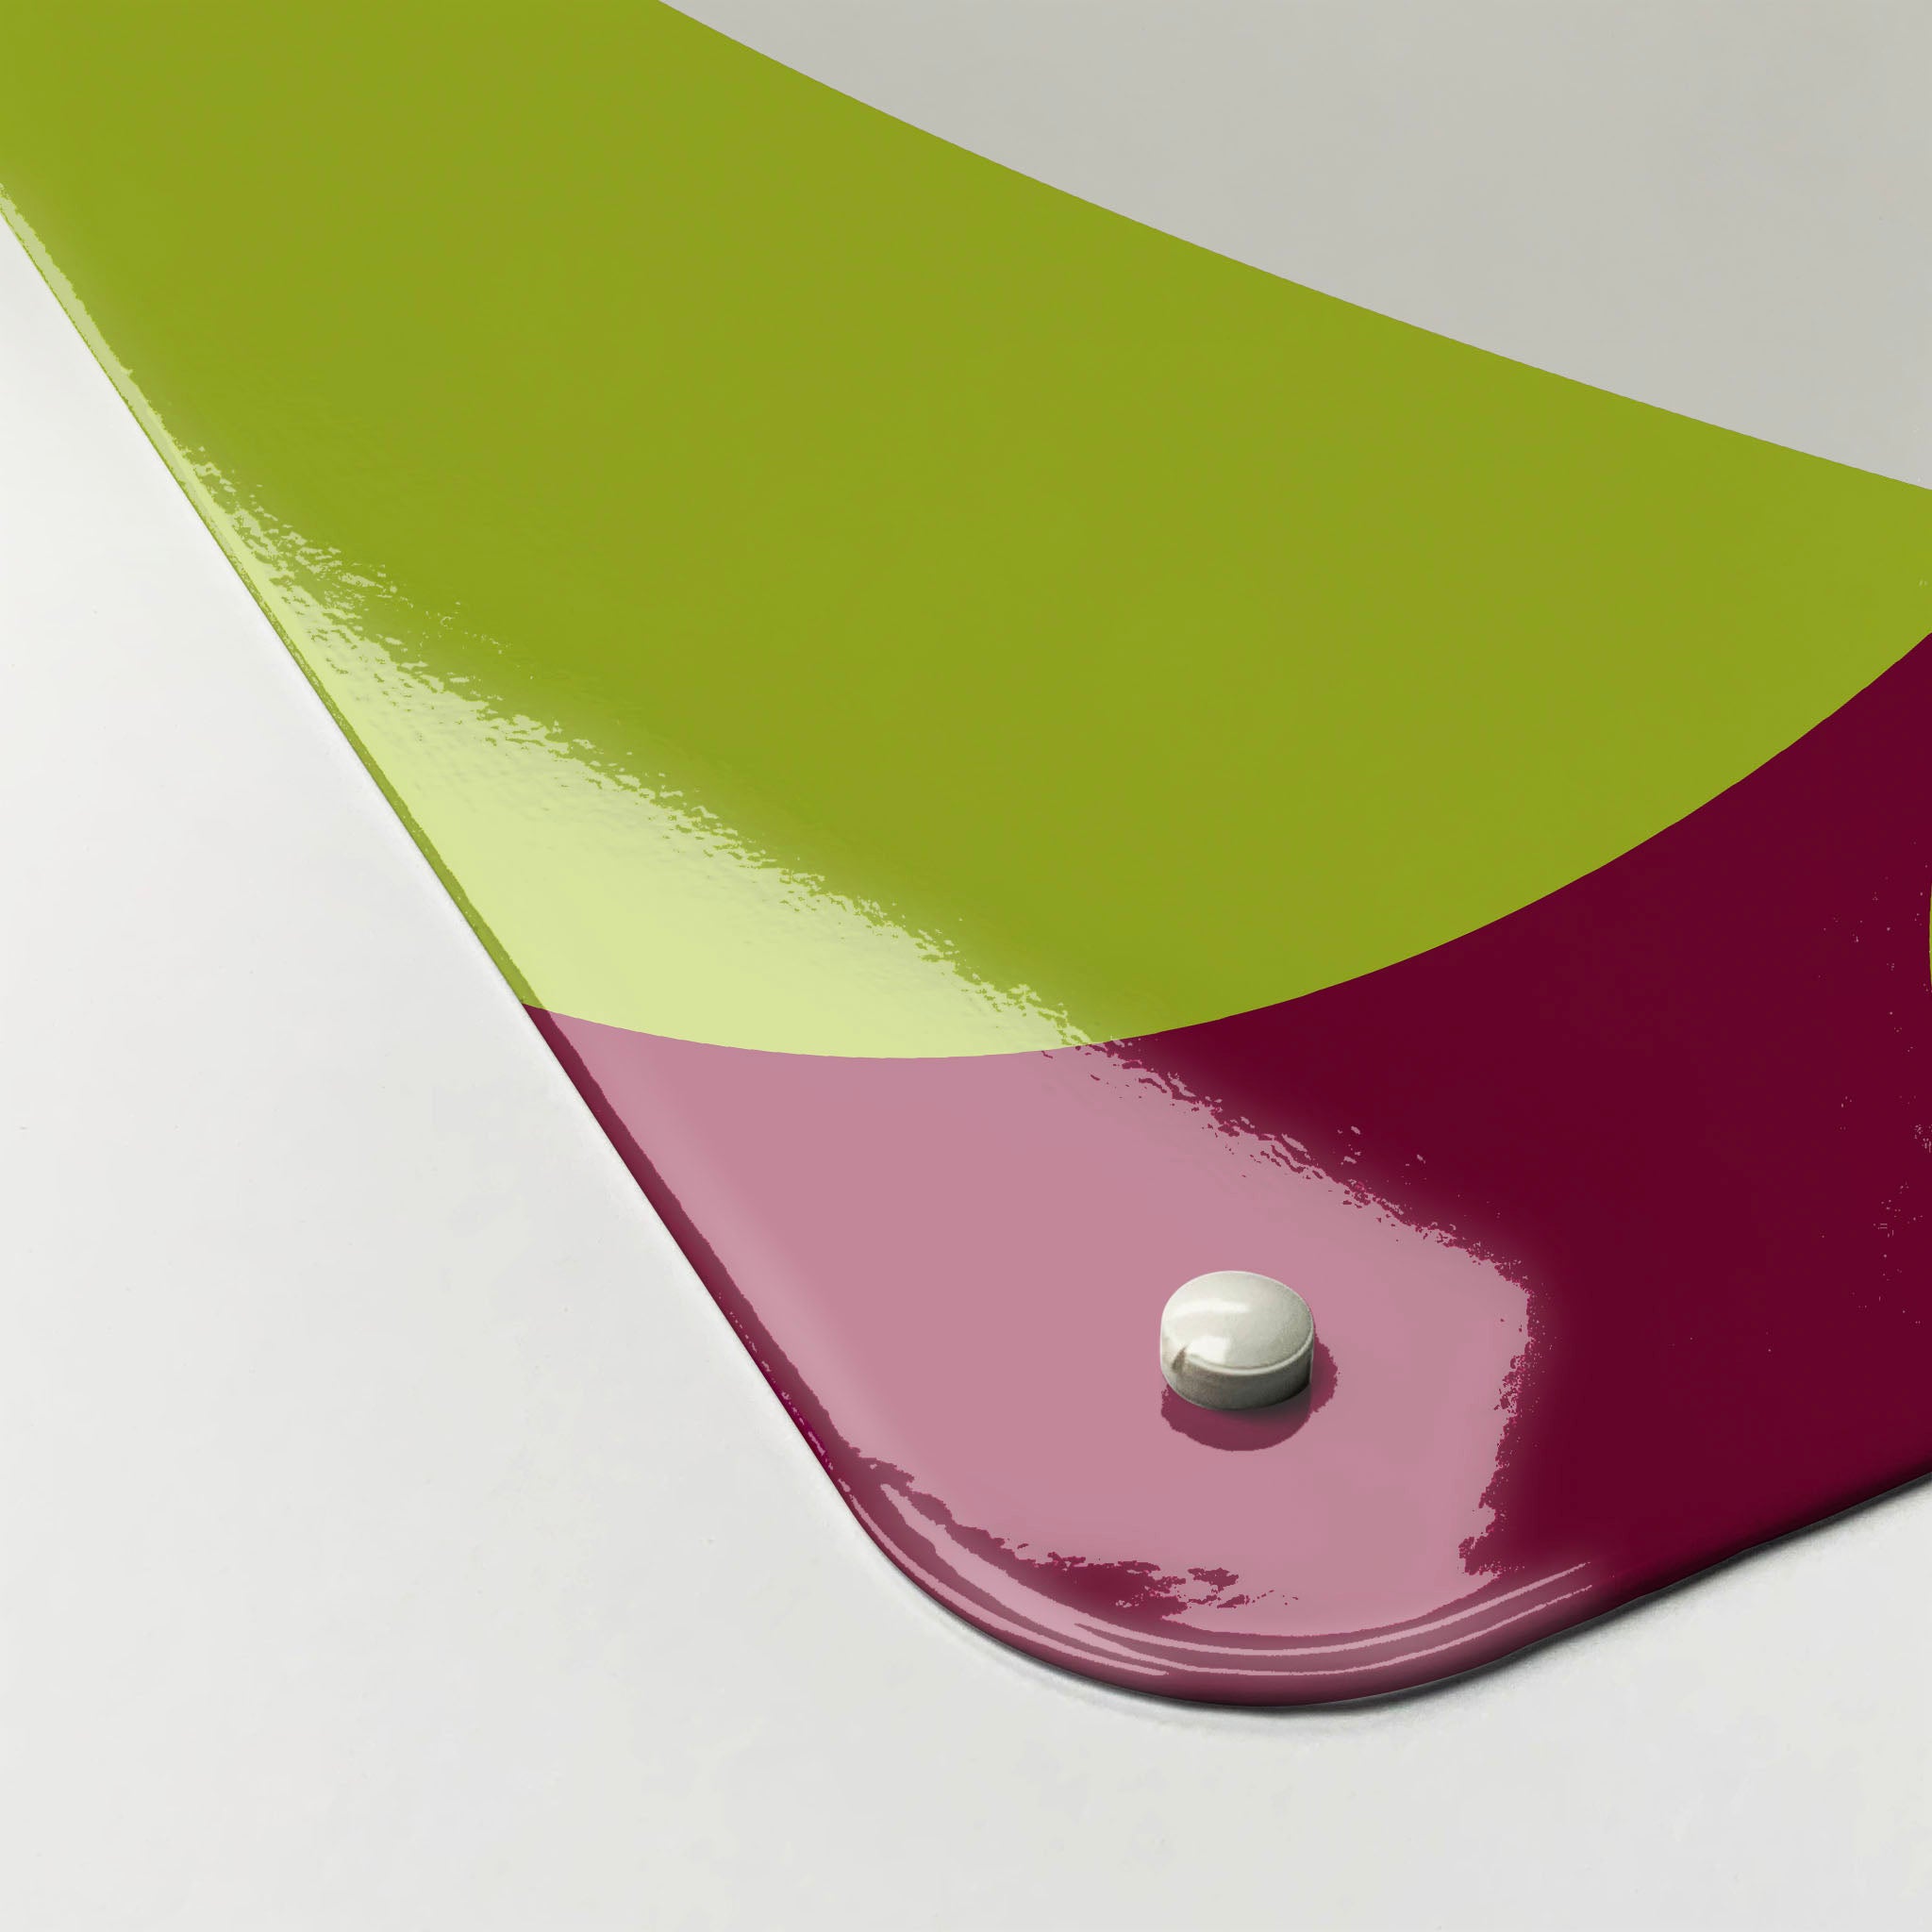 The corner detail of a green apples design magnetic board to show it’s high gloss surface